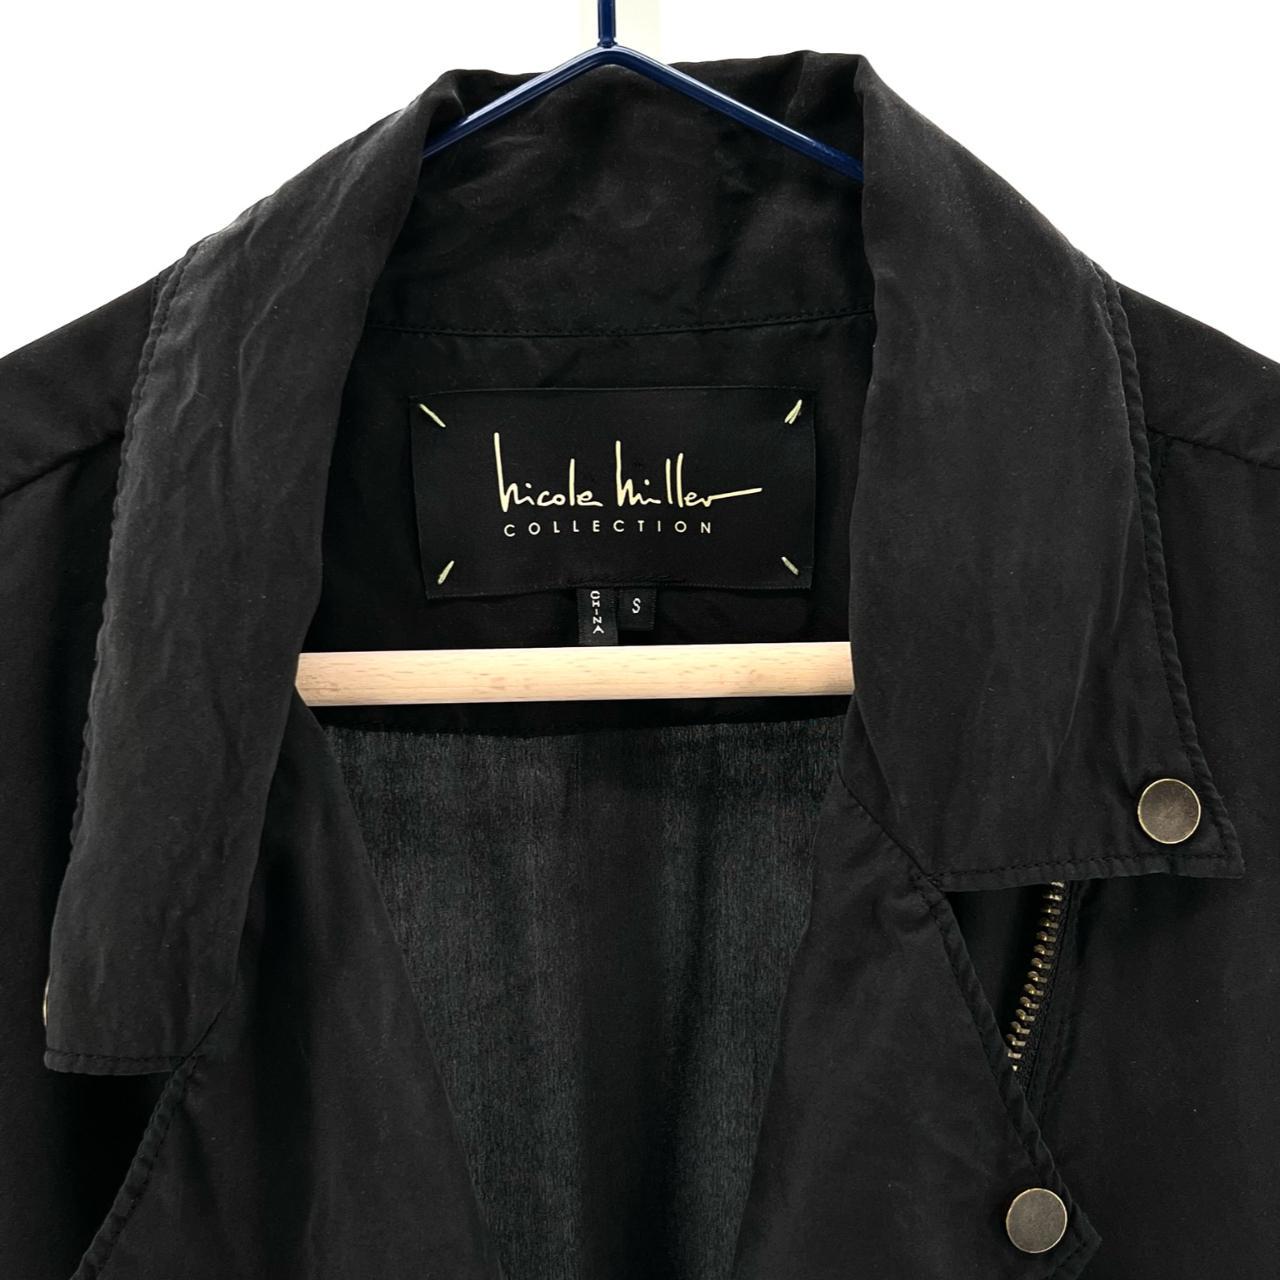 Product Image 3 - Biker-inspired Nicole Miller Collection black